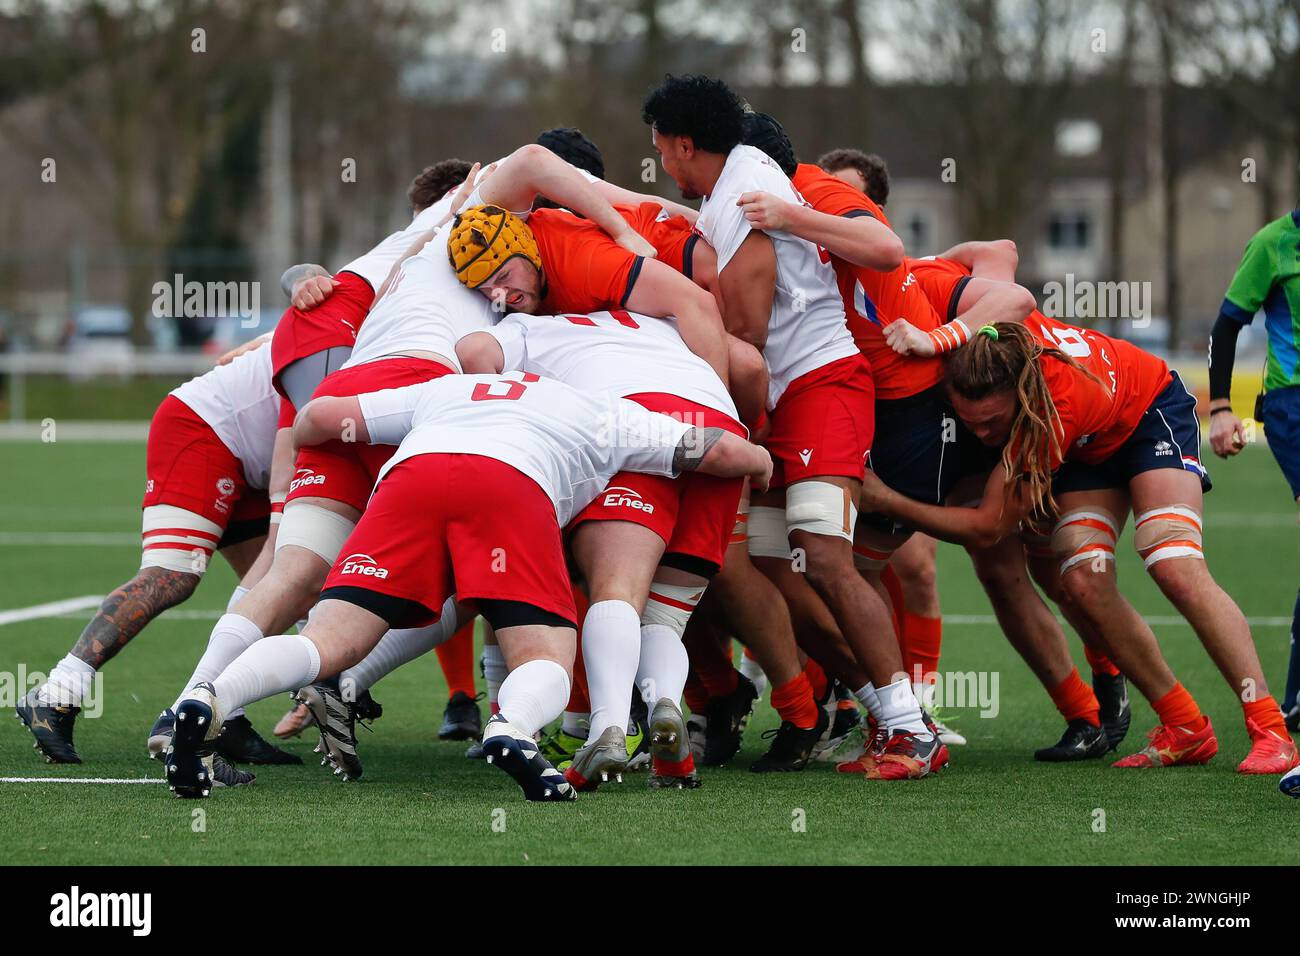 AMSTERDAM, NETHERLANDS - MARCH 02: Maul with Christopher Raymond player of RC't Gooi during the international Rugby Europe Championship match between Stock Photo